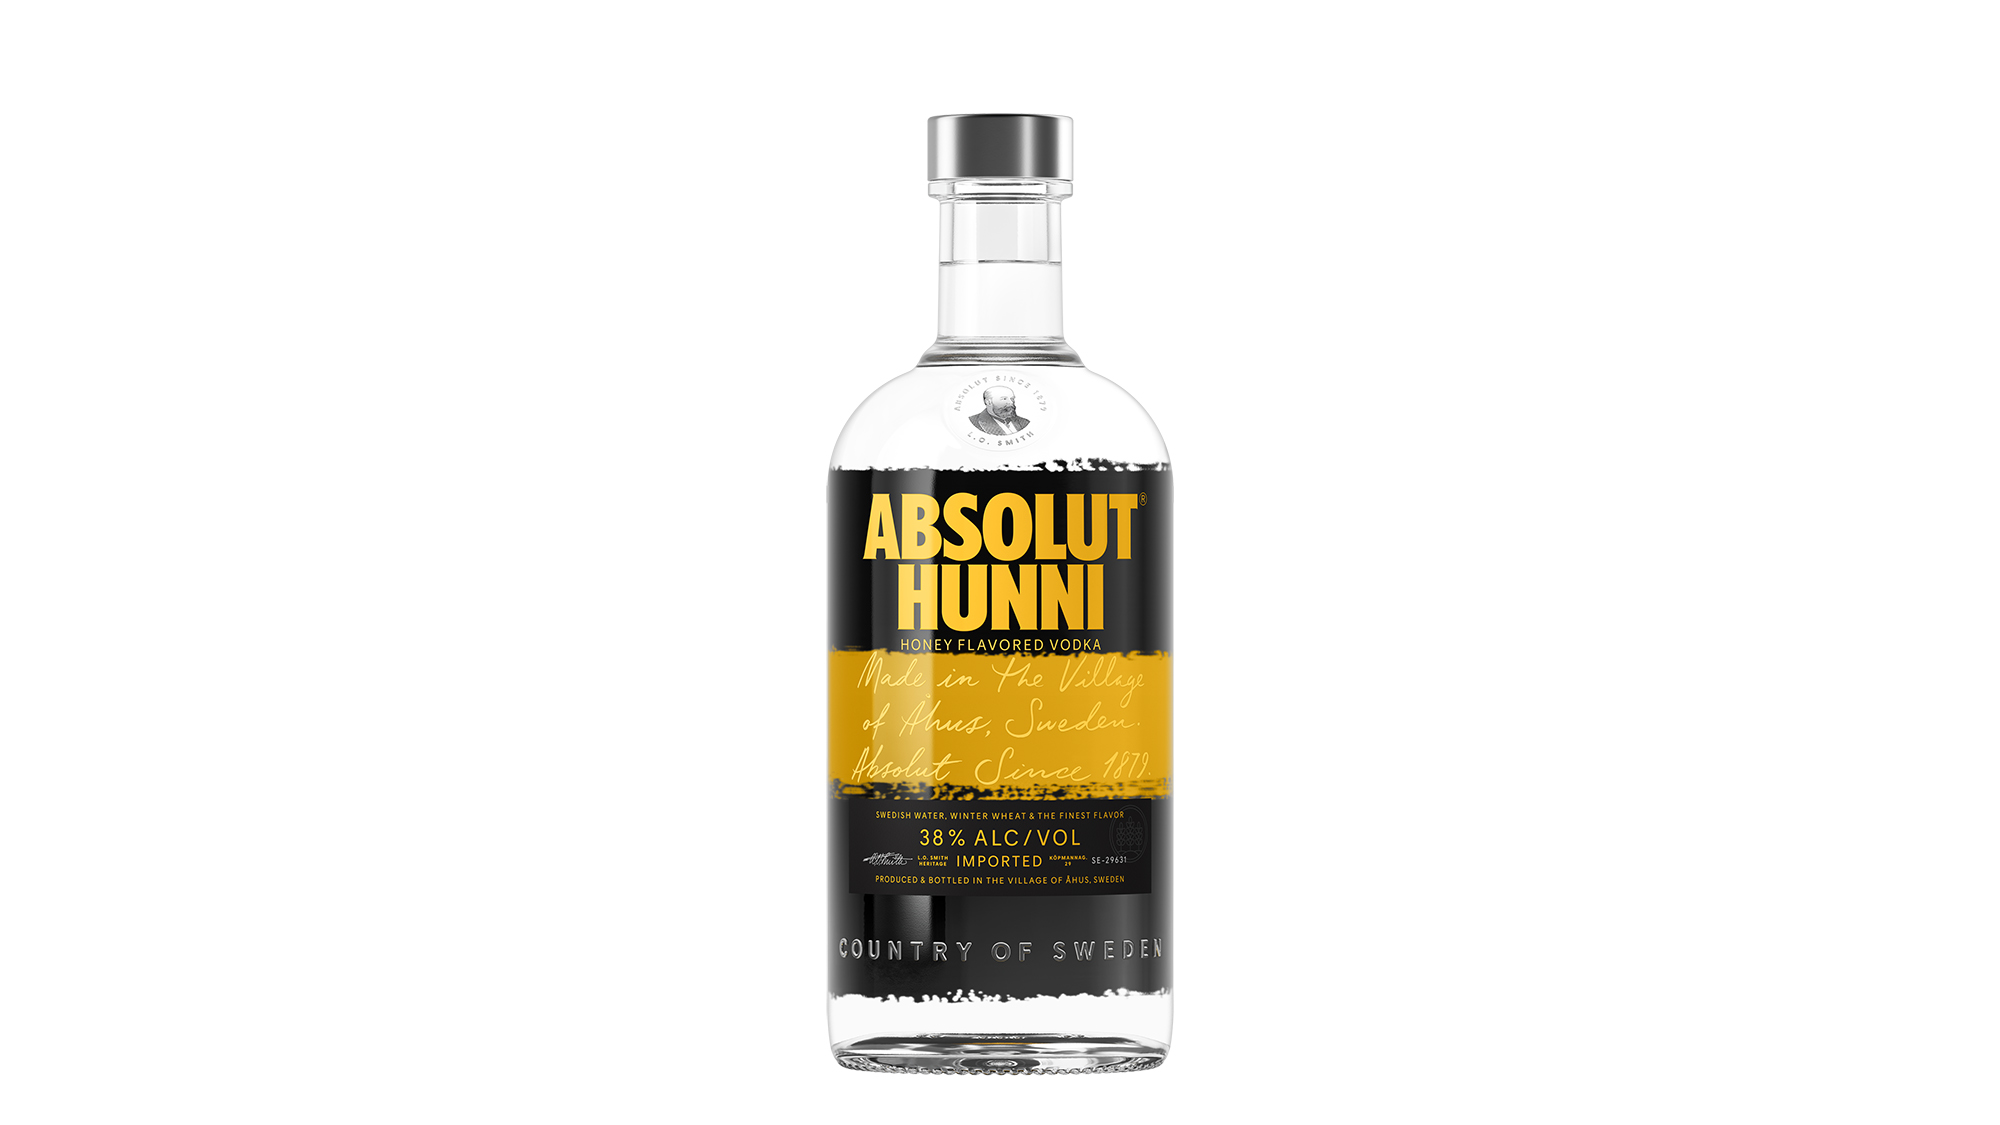 Absolut Hunni Brings Buzz To Flavored Vodka